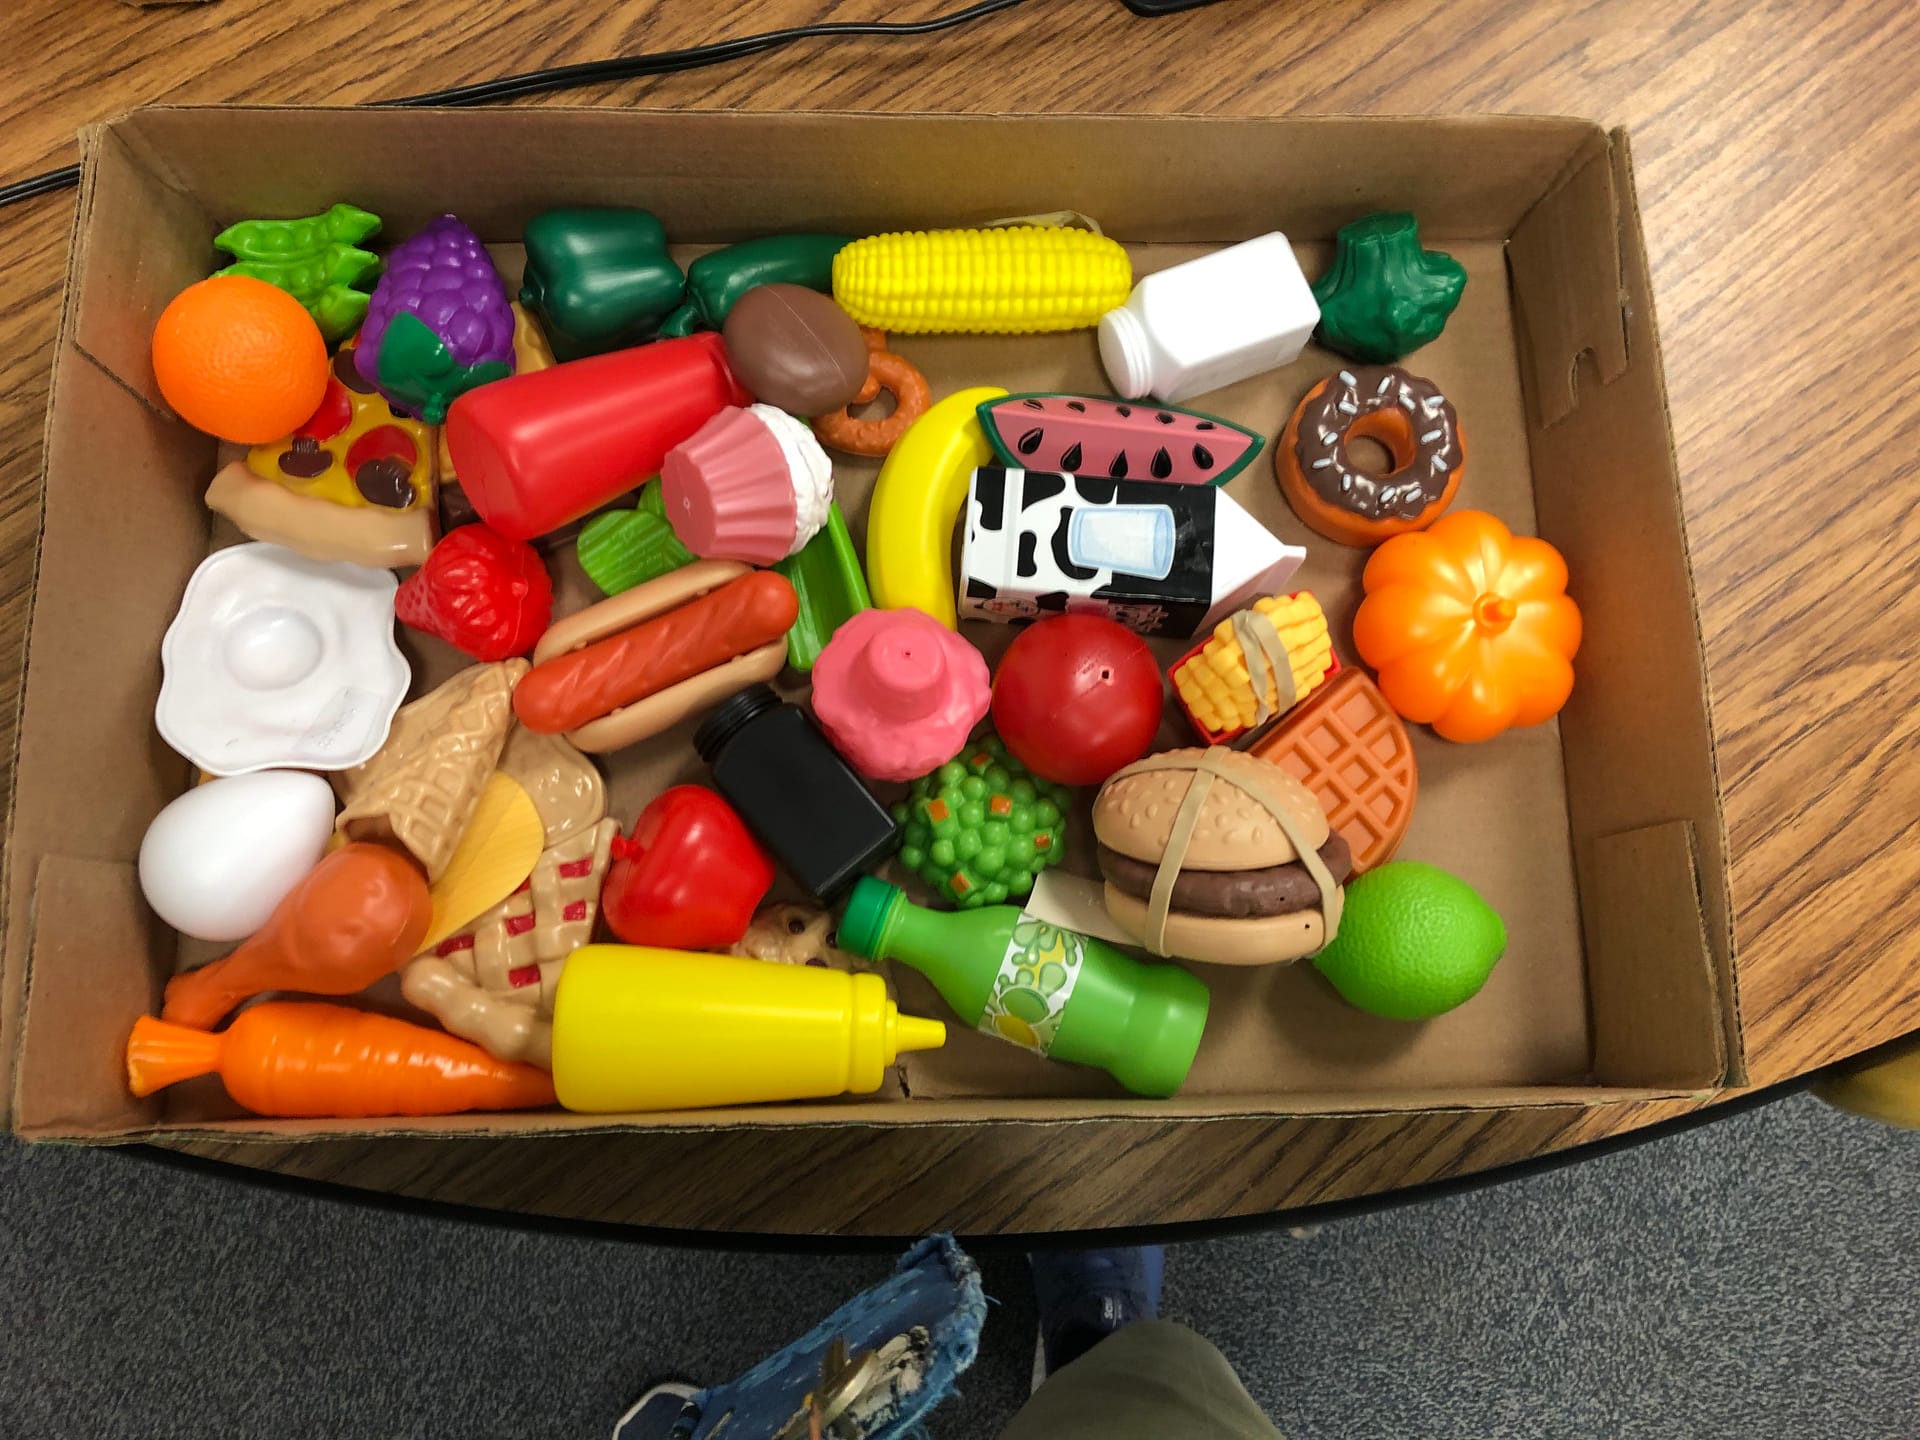 Numerous play food items of different colors in a cardboard box sitting on a table